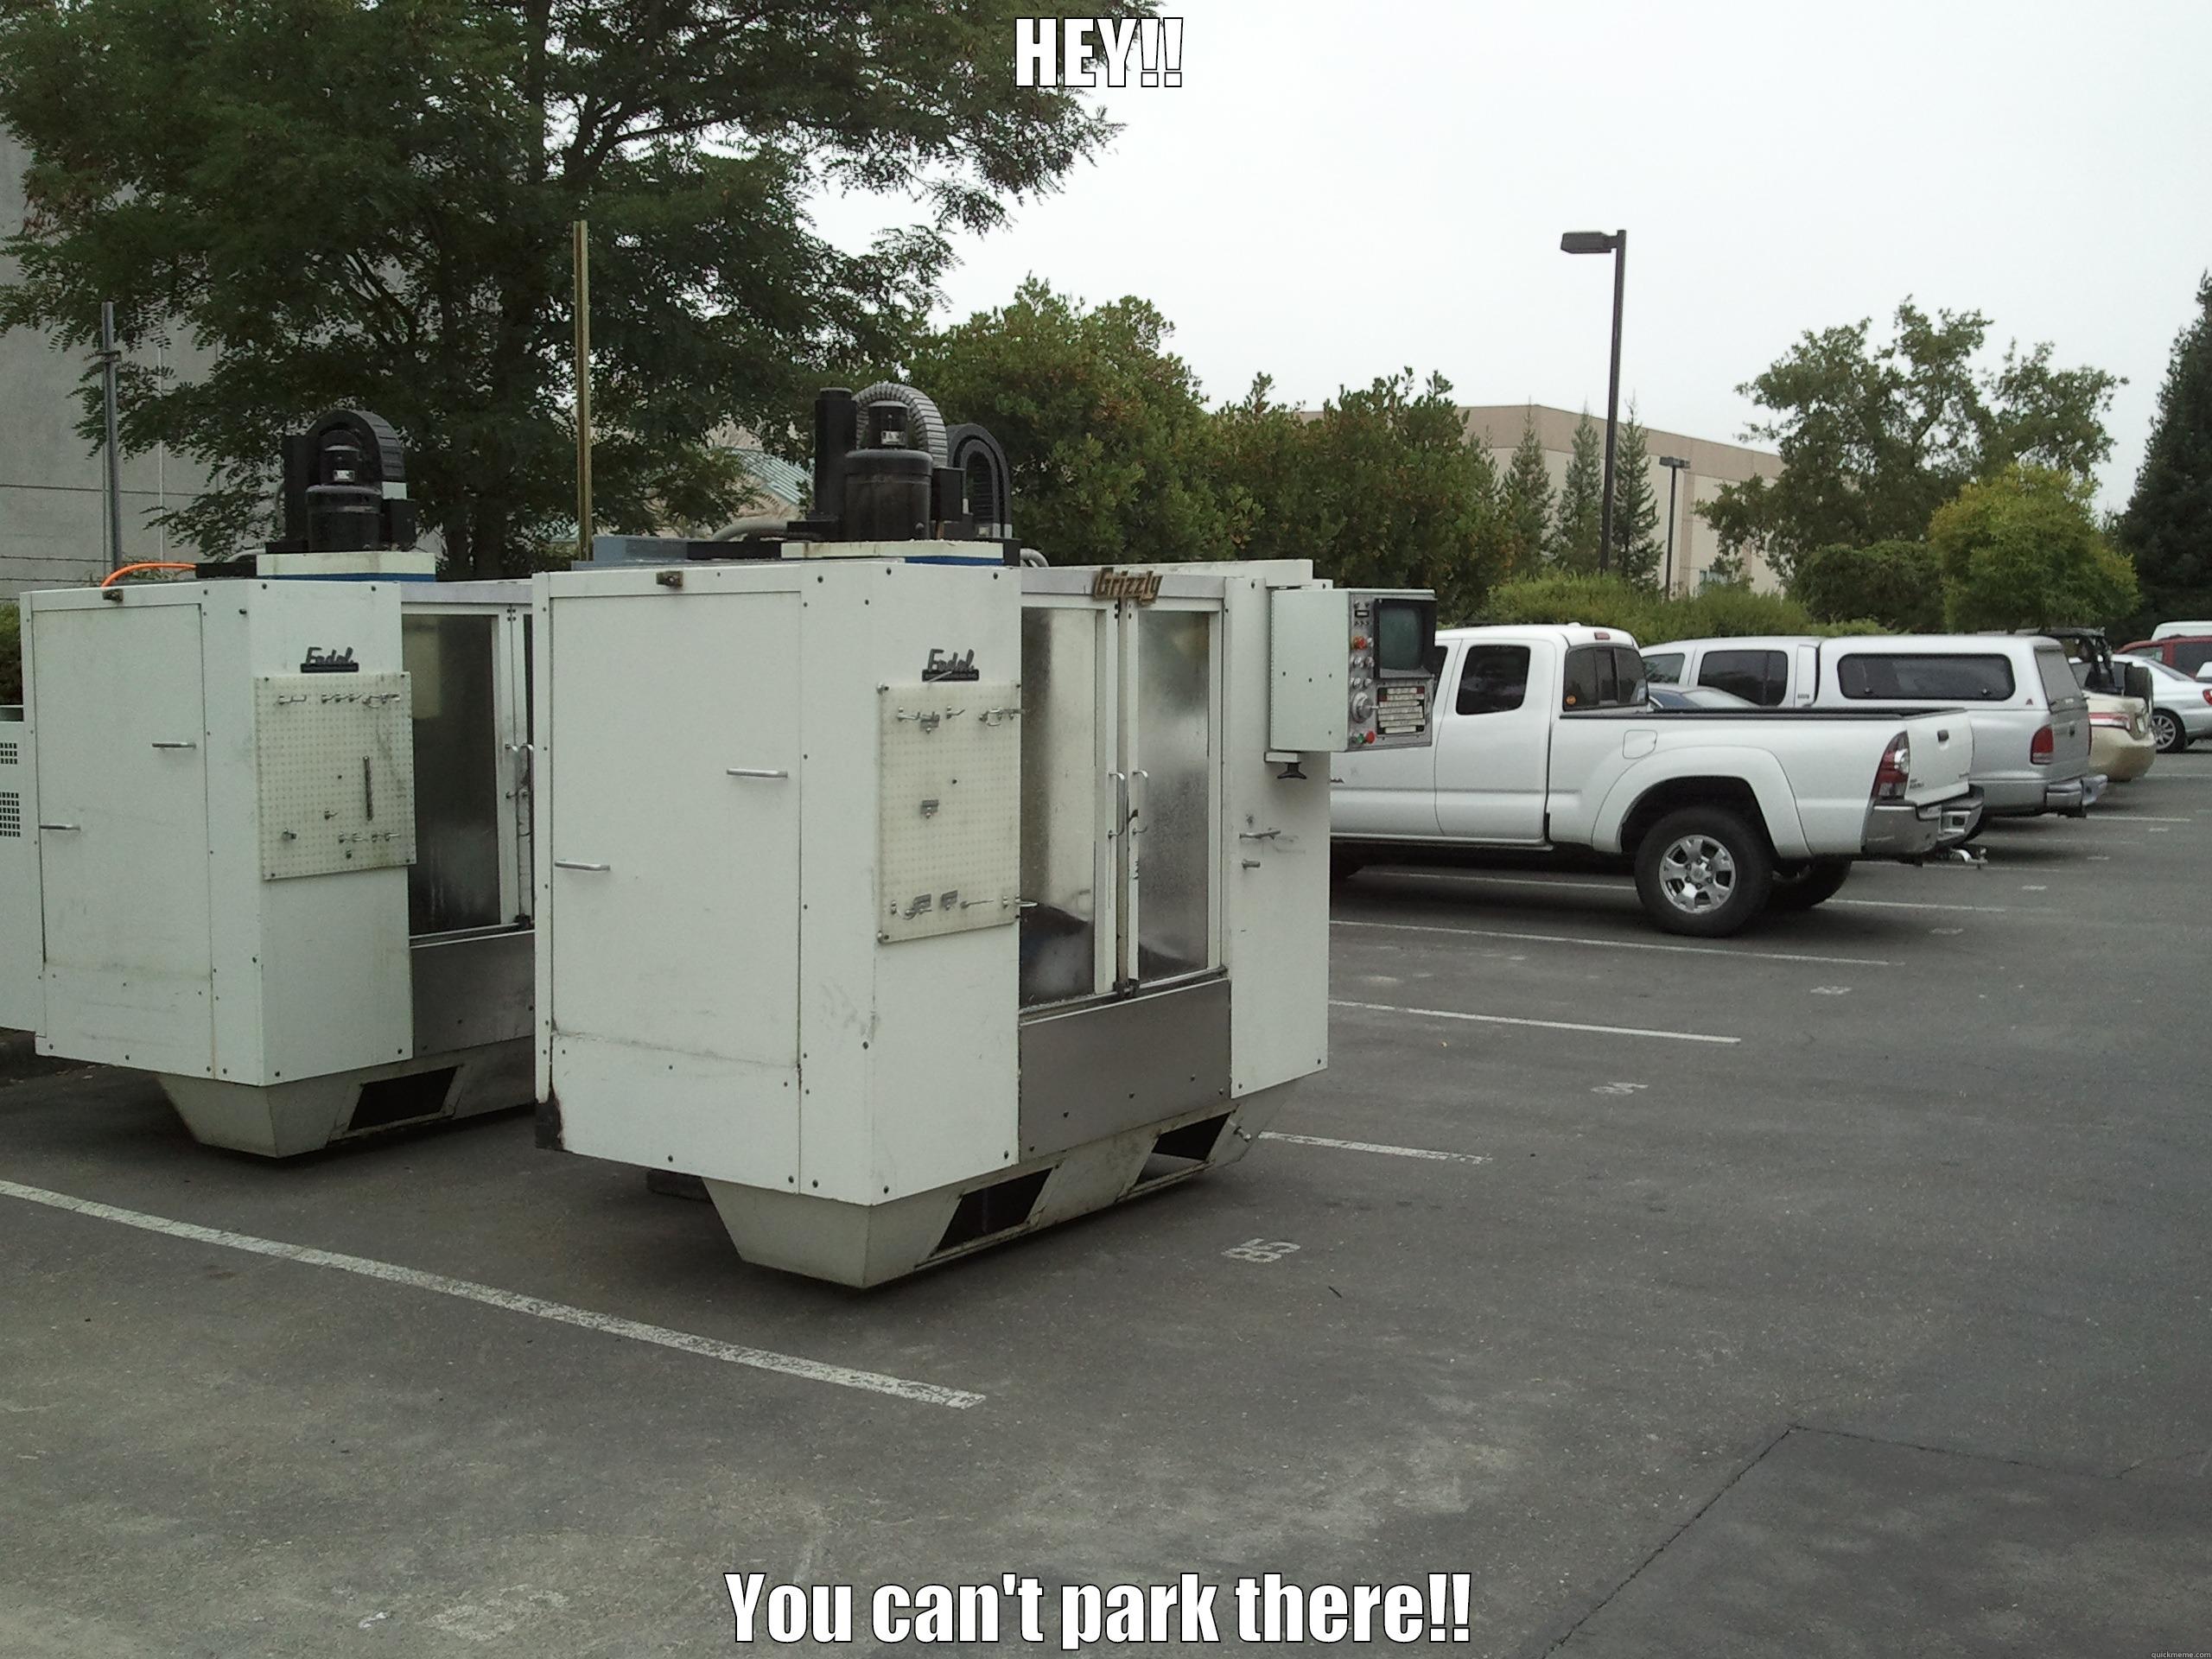 HEY!! YOU CAN'T PARK THERE!! Misc